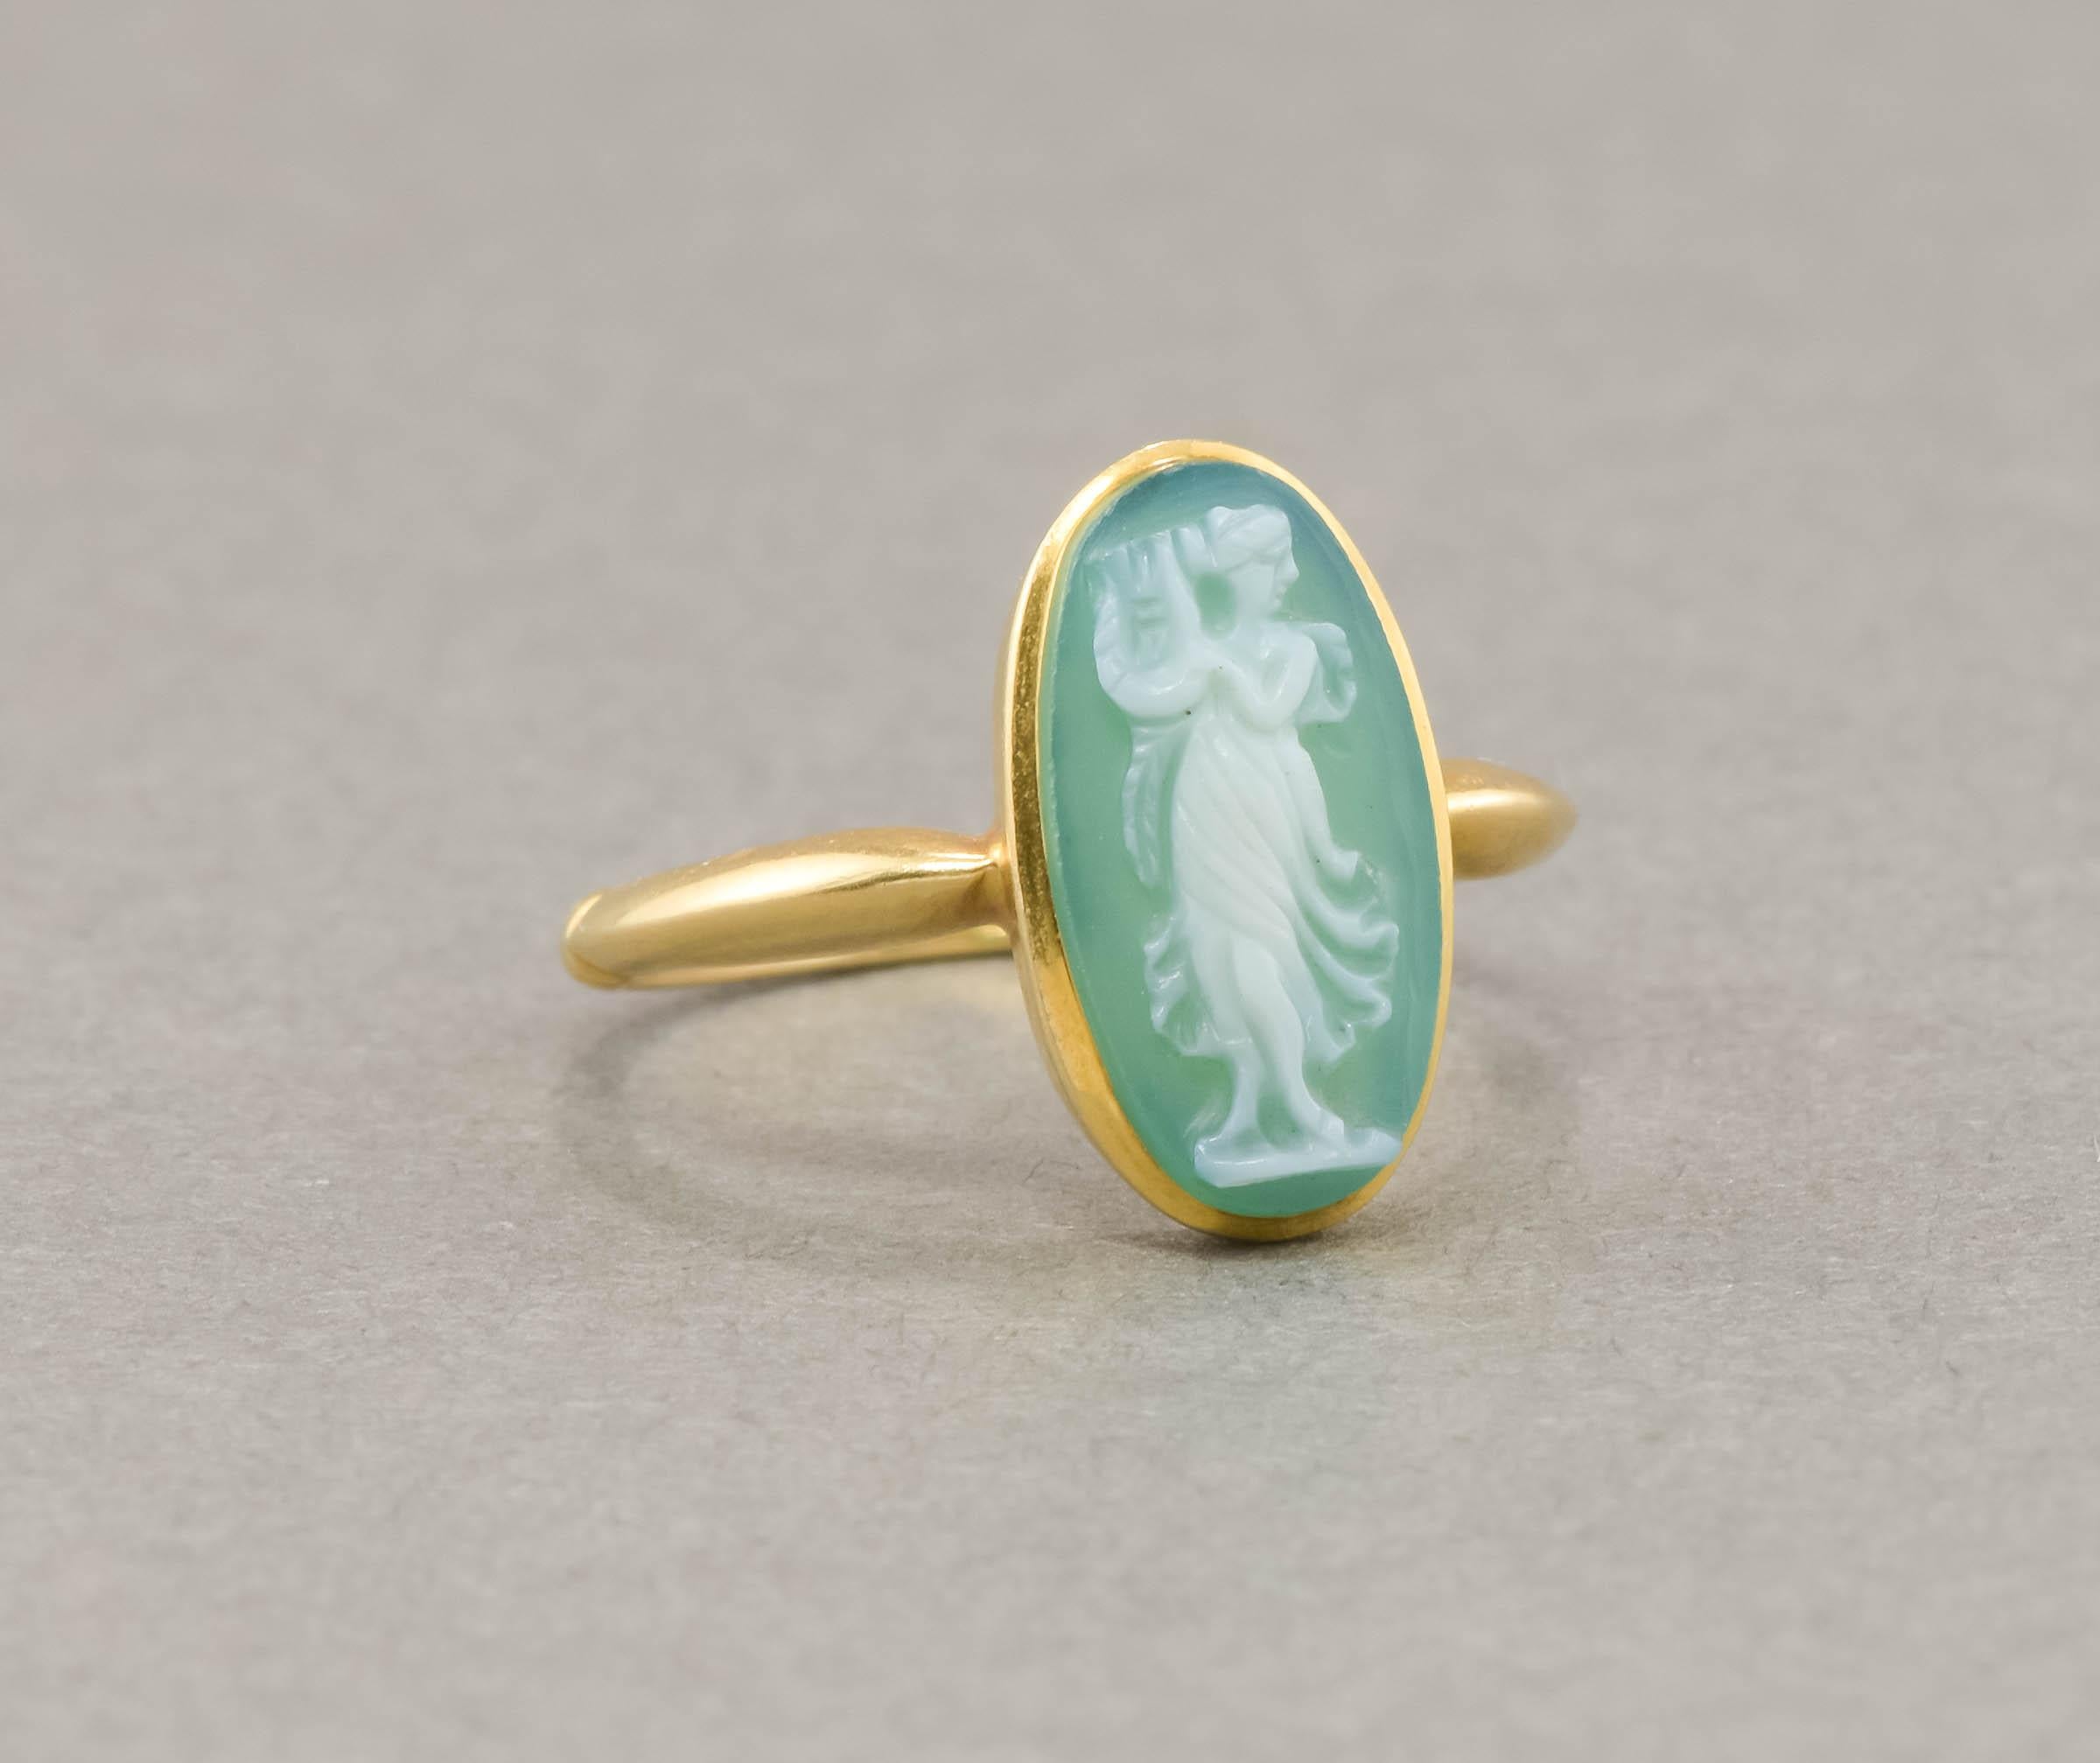 Oval Cut Carved Green Chalcedony Cameo Ring in 18K Gold, Hallmarked Chester 1909